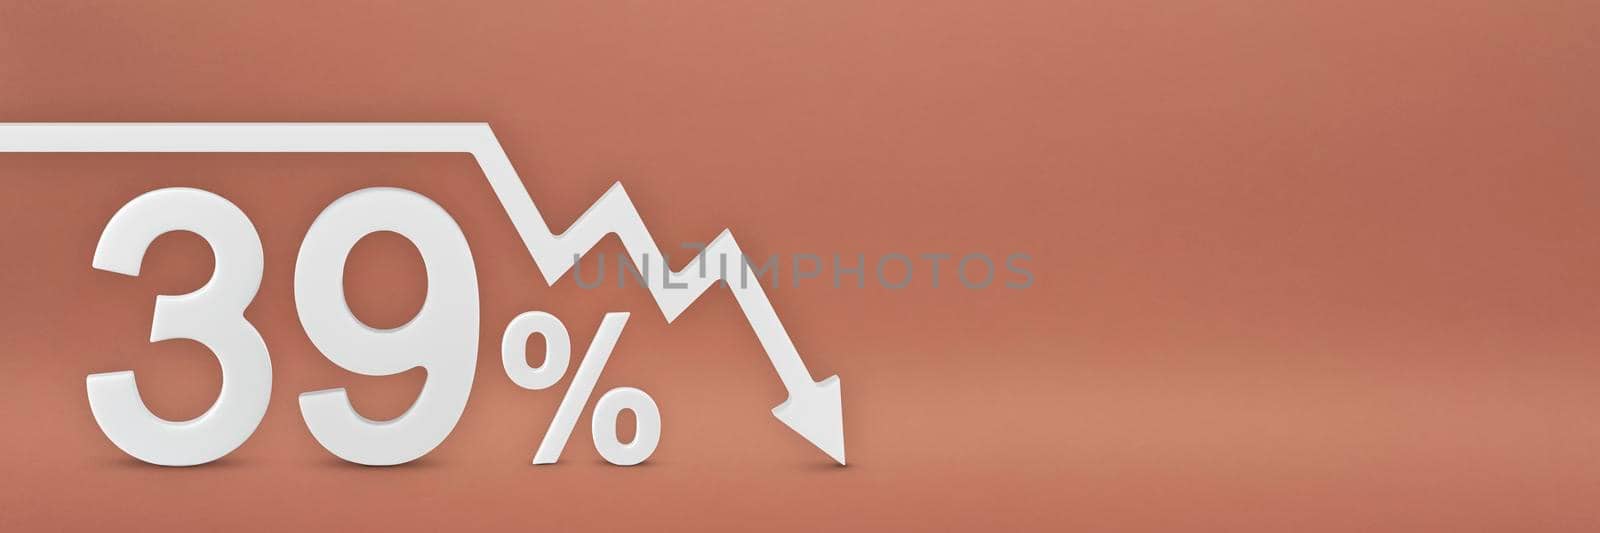 thirty-nine percent, the arrow on the graph is pointing down. Stock market crash, bear market, inflation.Economic collapse, collapse of stocks.3d banner,39 percent discount sign on a red background. by SERSOL